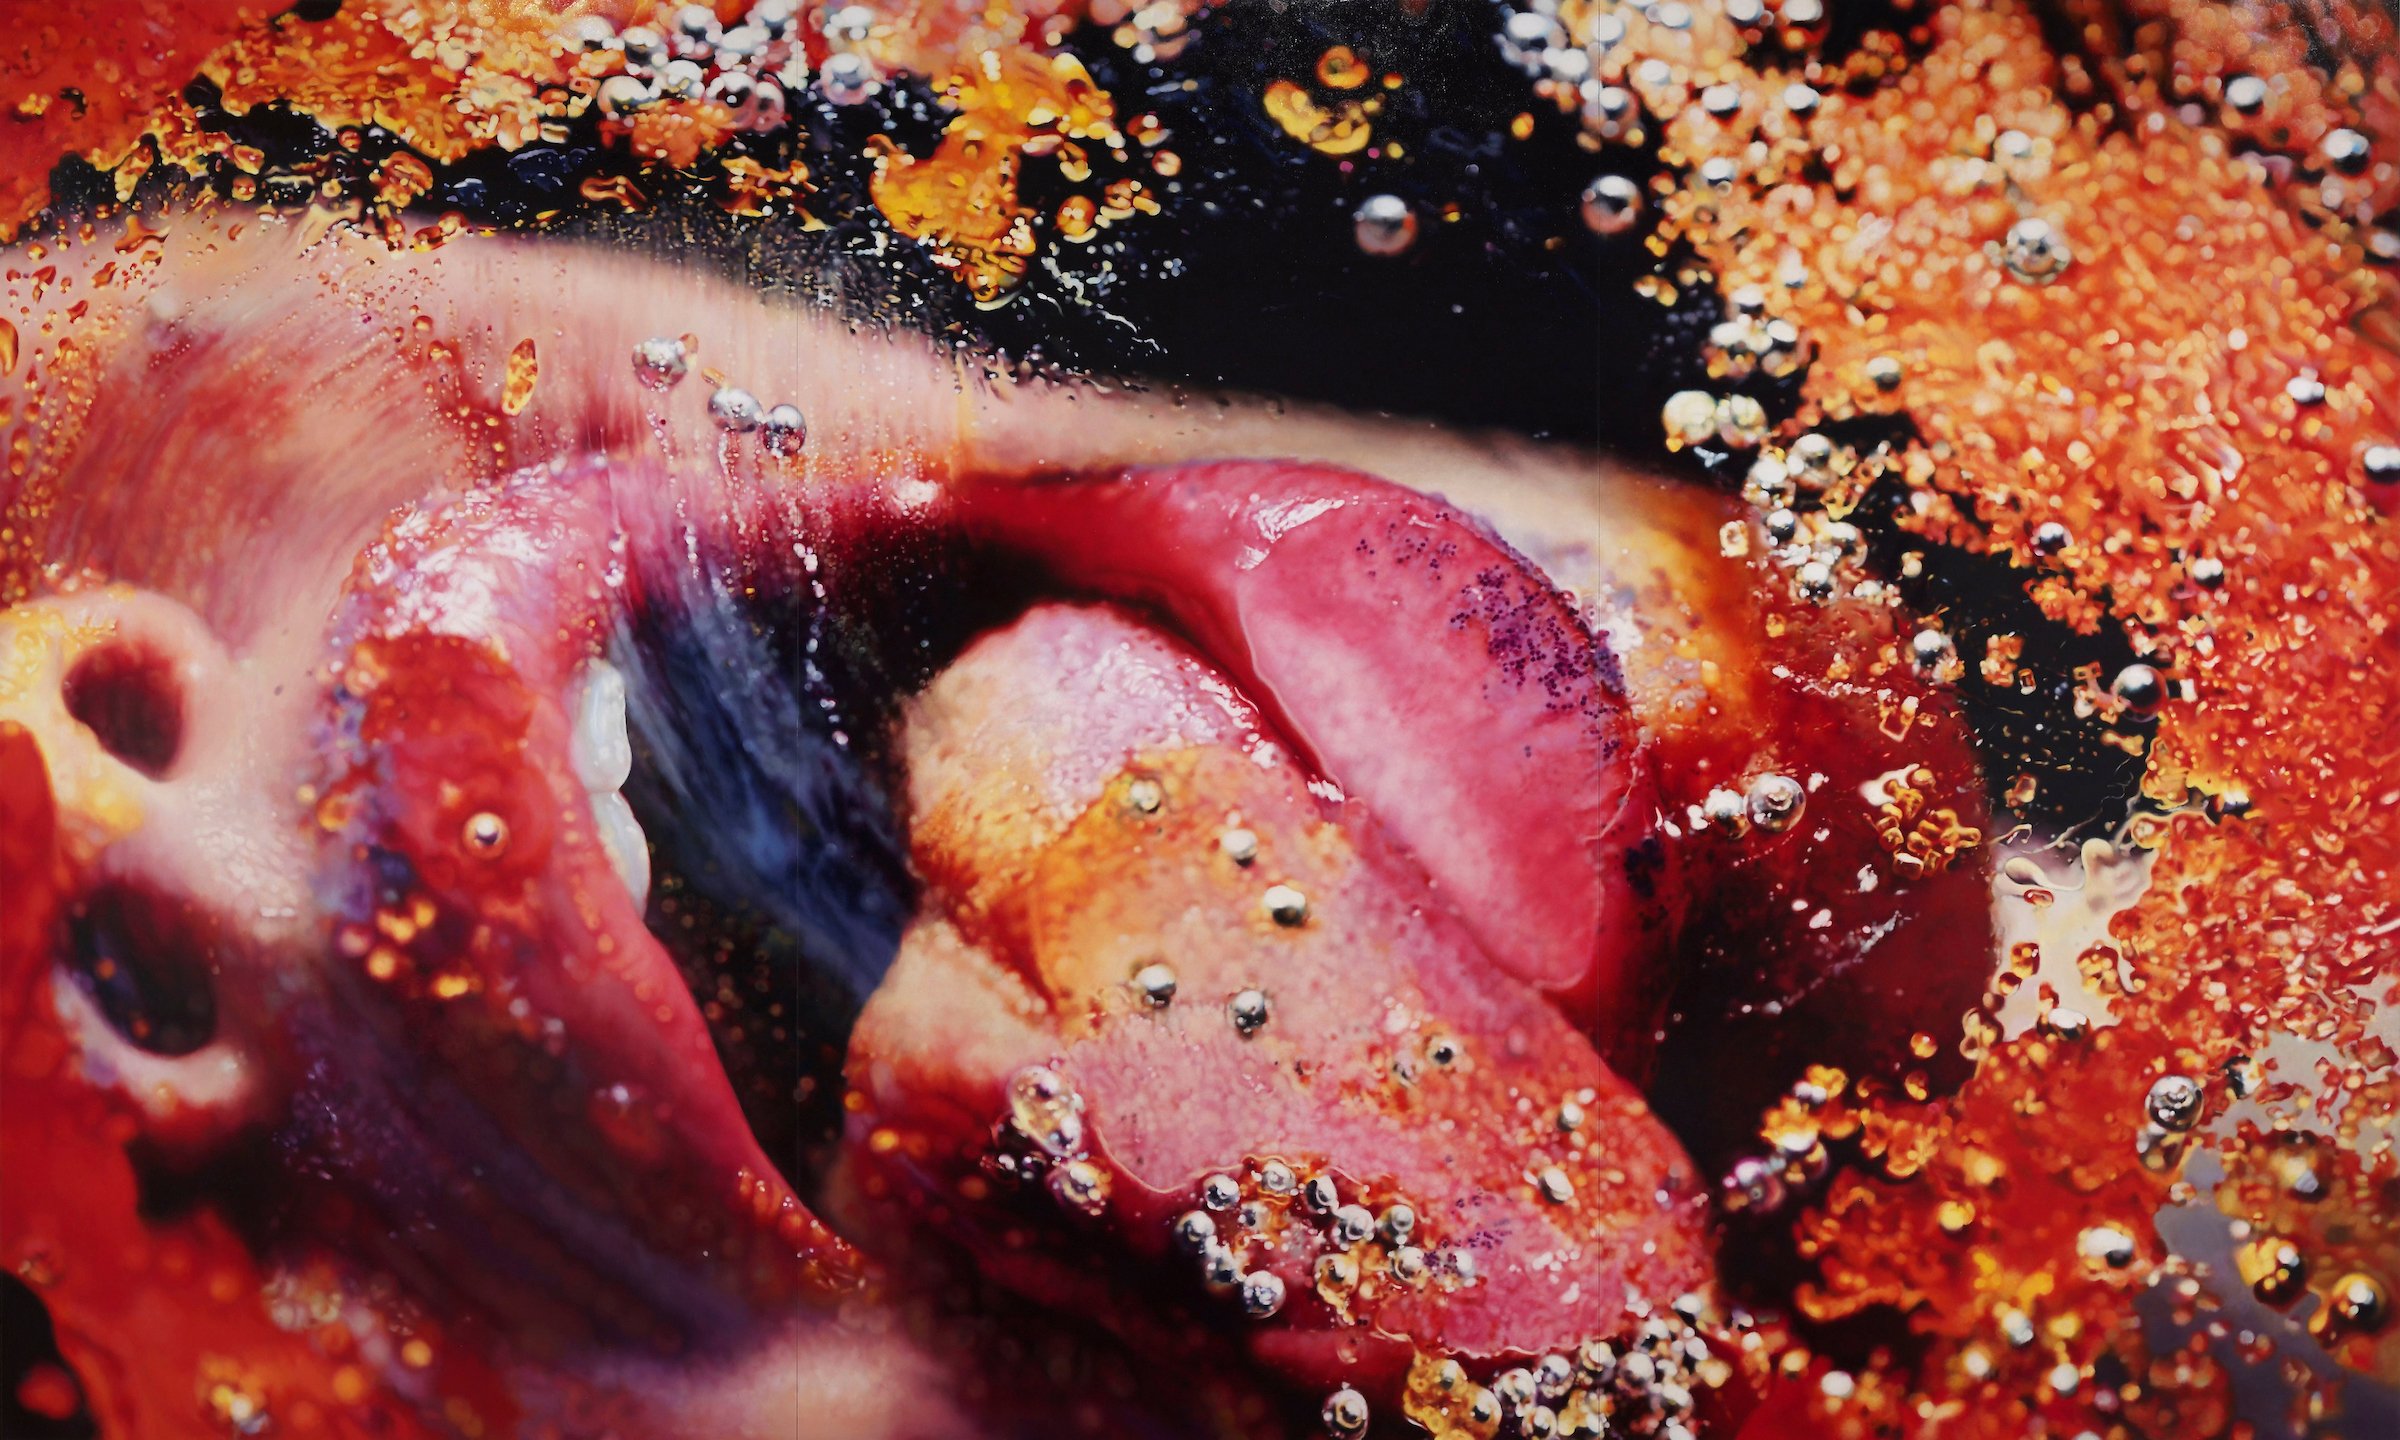 An enamel on metal artwork of a woman with bright red lipstick licking the screen's surface by Marilyn Minter, entitled Orange Crush dated 2009